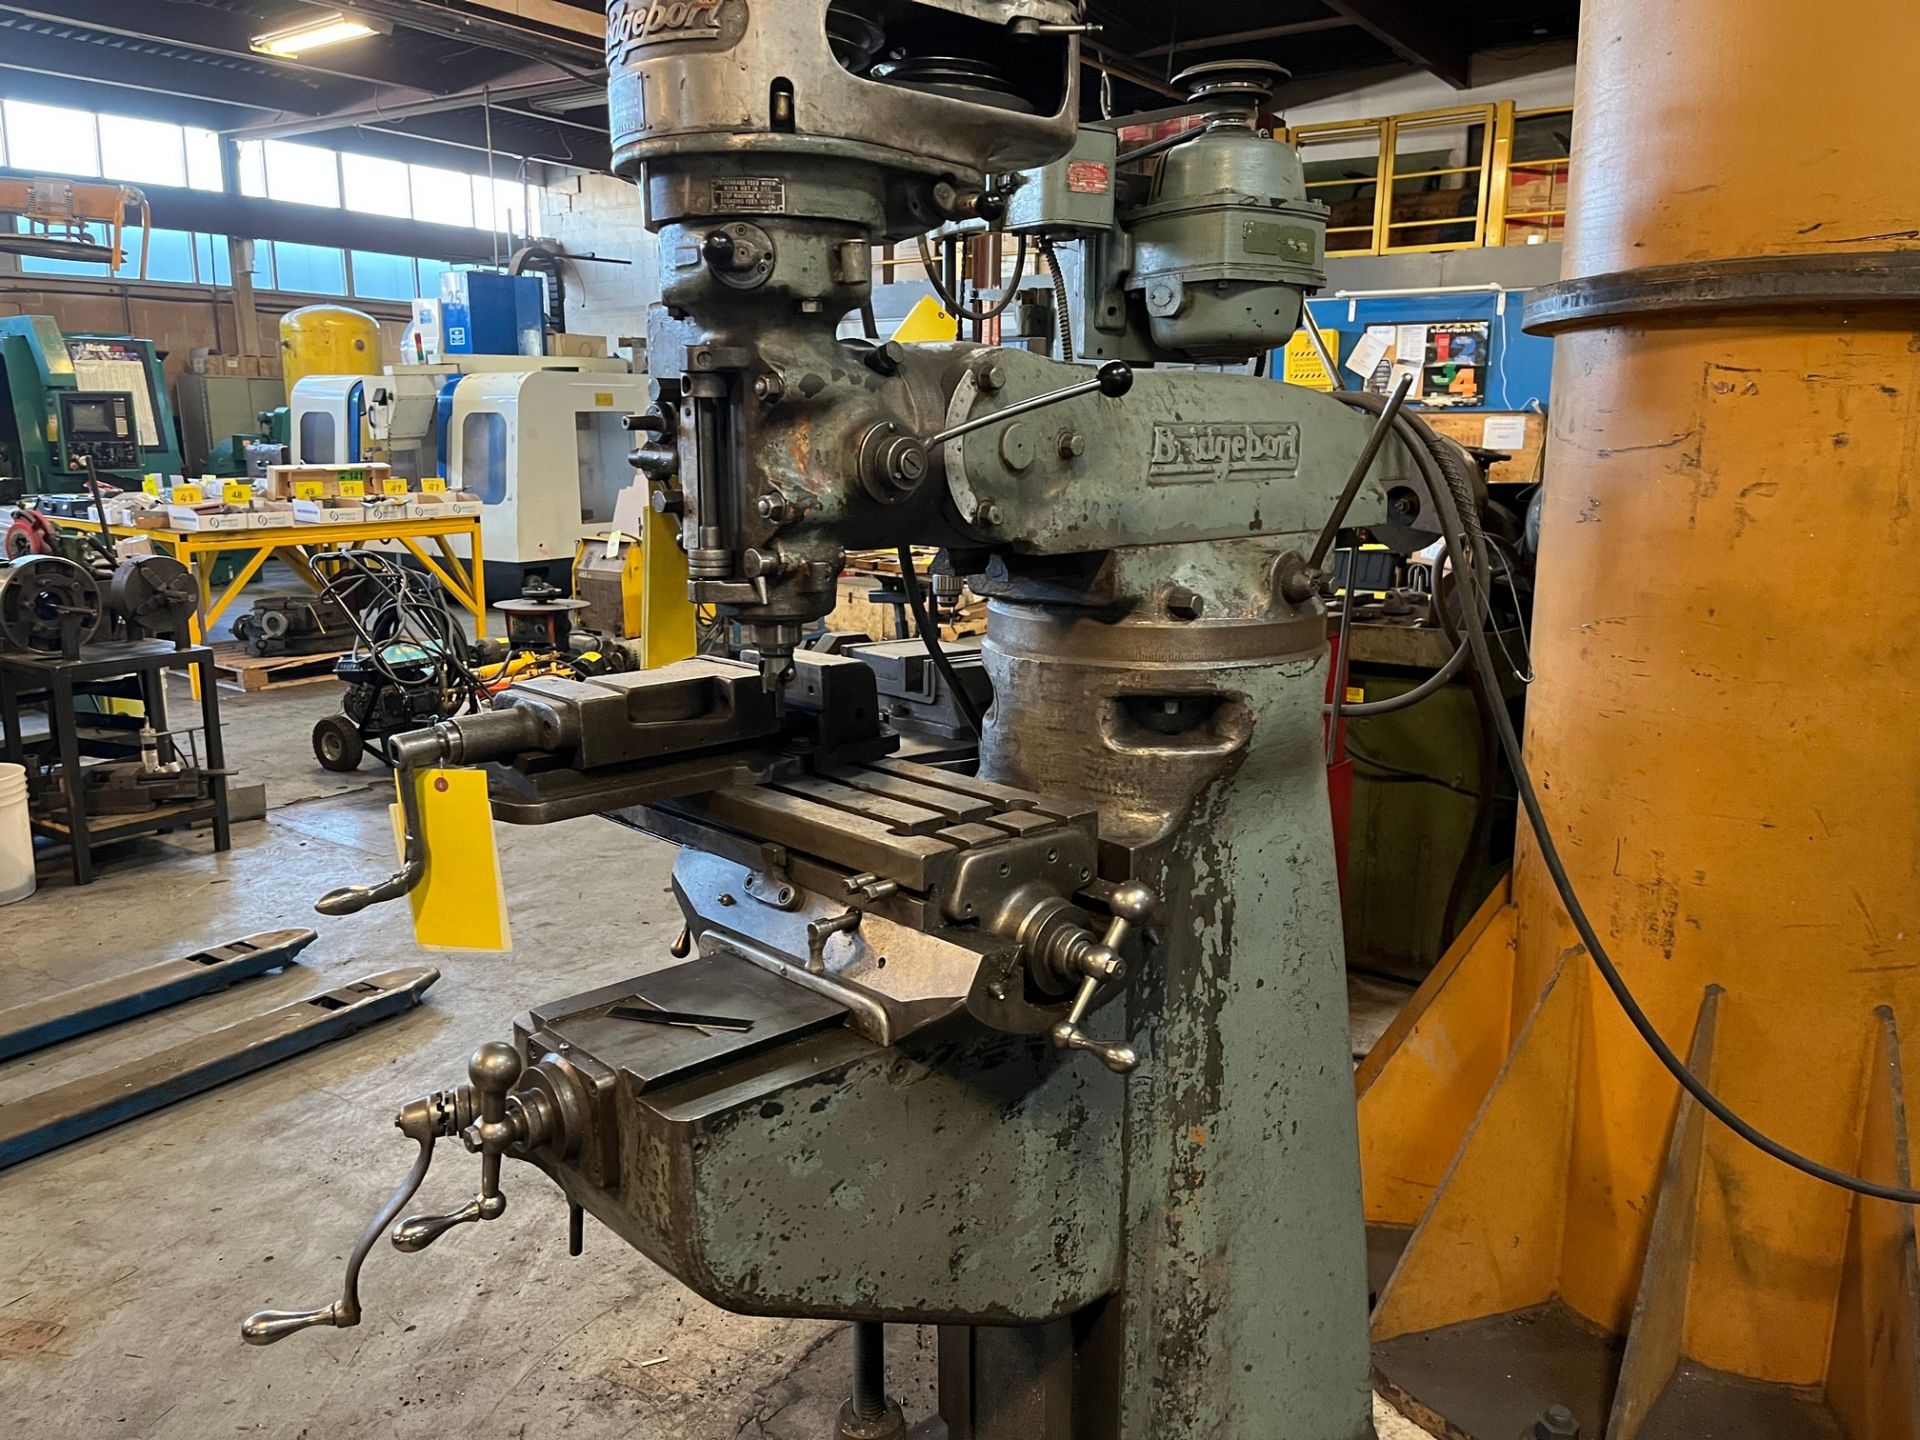 BRIDGEPORT VERTICAL MILLING MACHINE, 80 TO 2720 RPM, S/N J8698P, 9" X 36" TABLE, NO VISE, COLLETS OR - Image 7 of 7